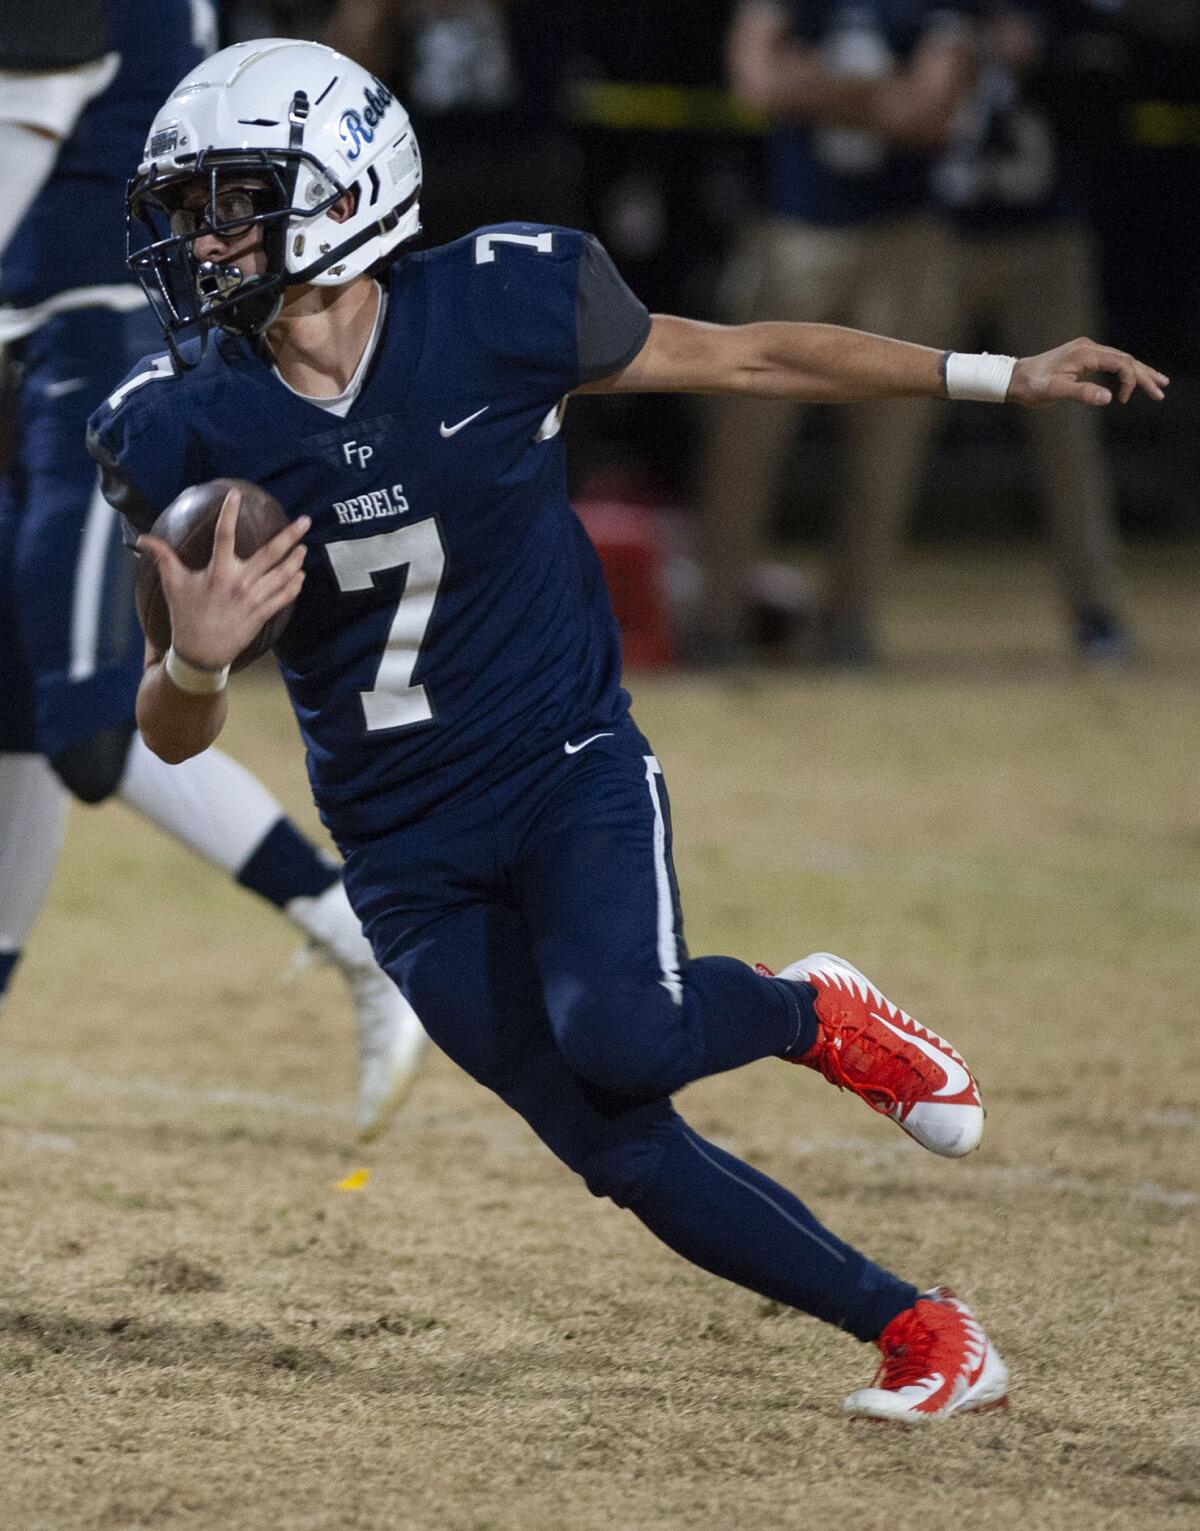 Flintridge Prep’s Alexander Payne runs the ball during Friday's CIF Southern Section Division I playoff game against PAL Academy at Flintridge Prep. (Photo by Miguel Vasconcellos)